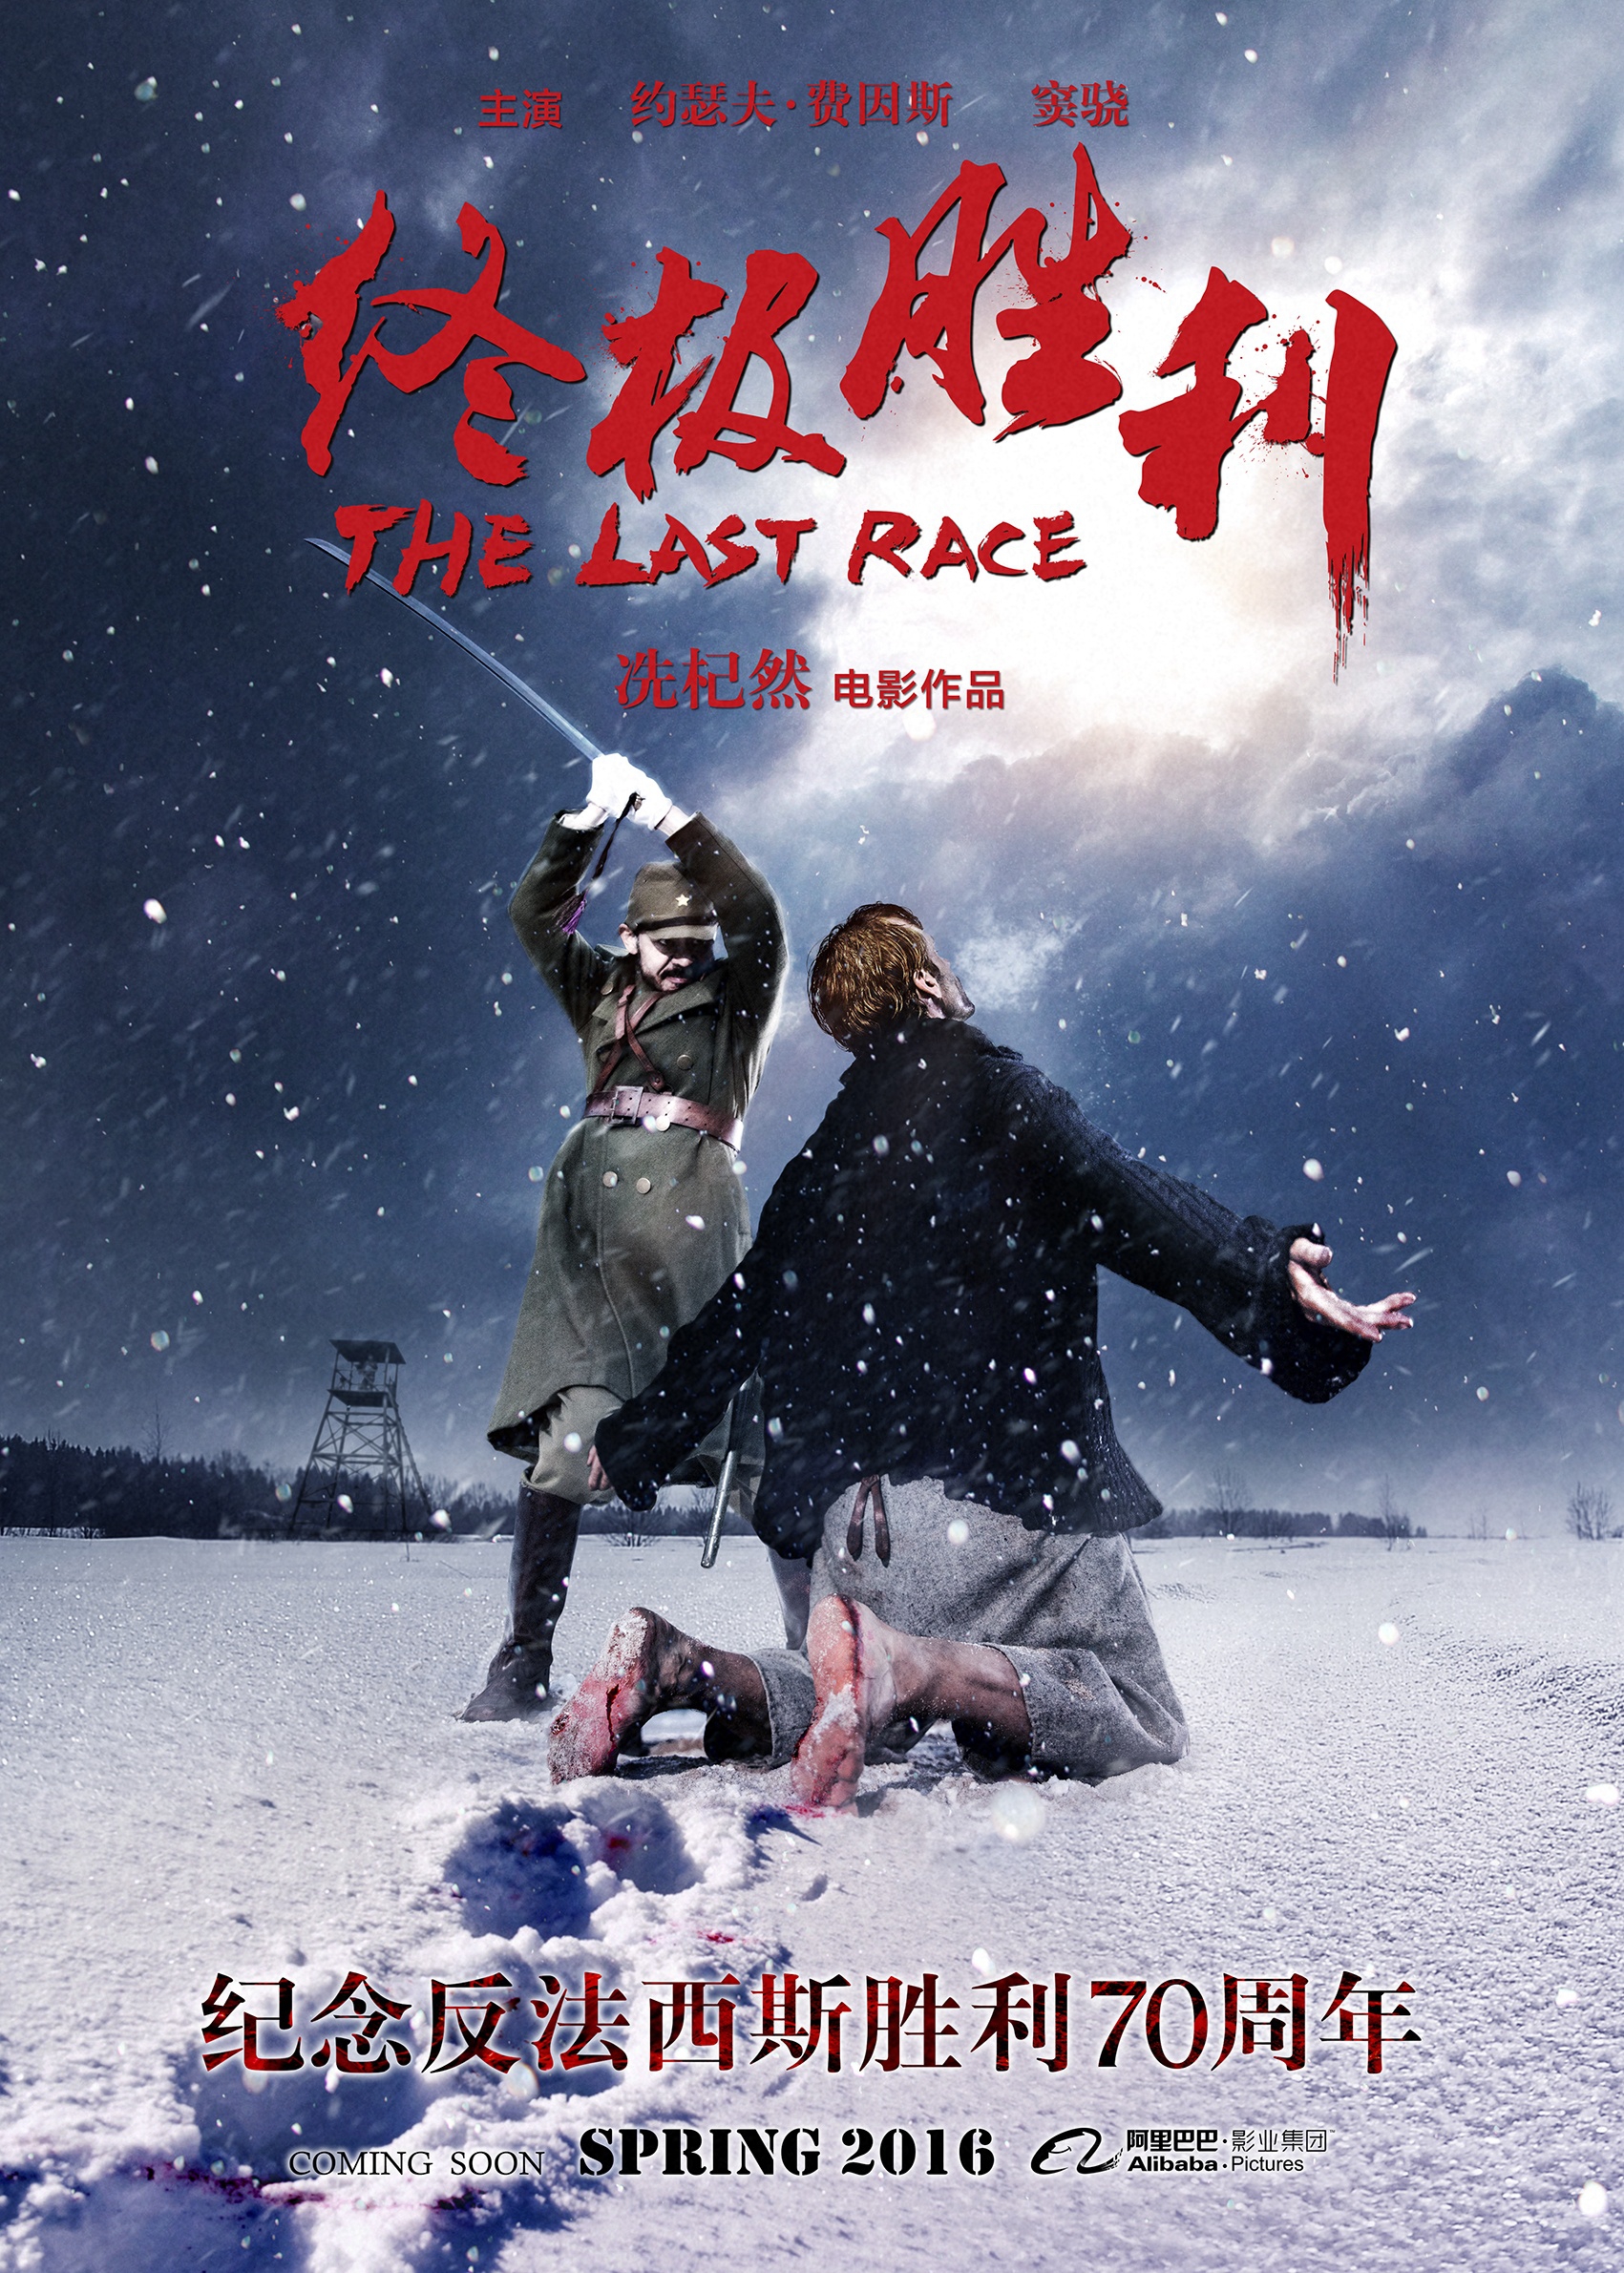  The Last Race (2015) Poster 